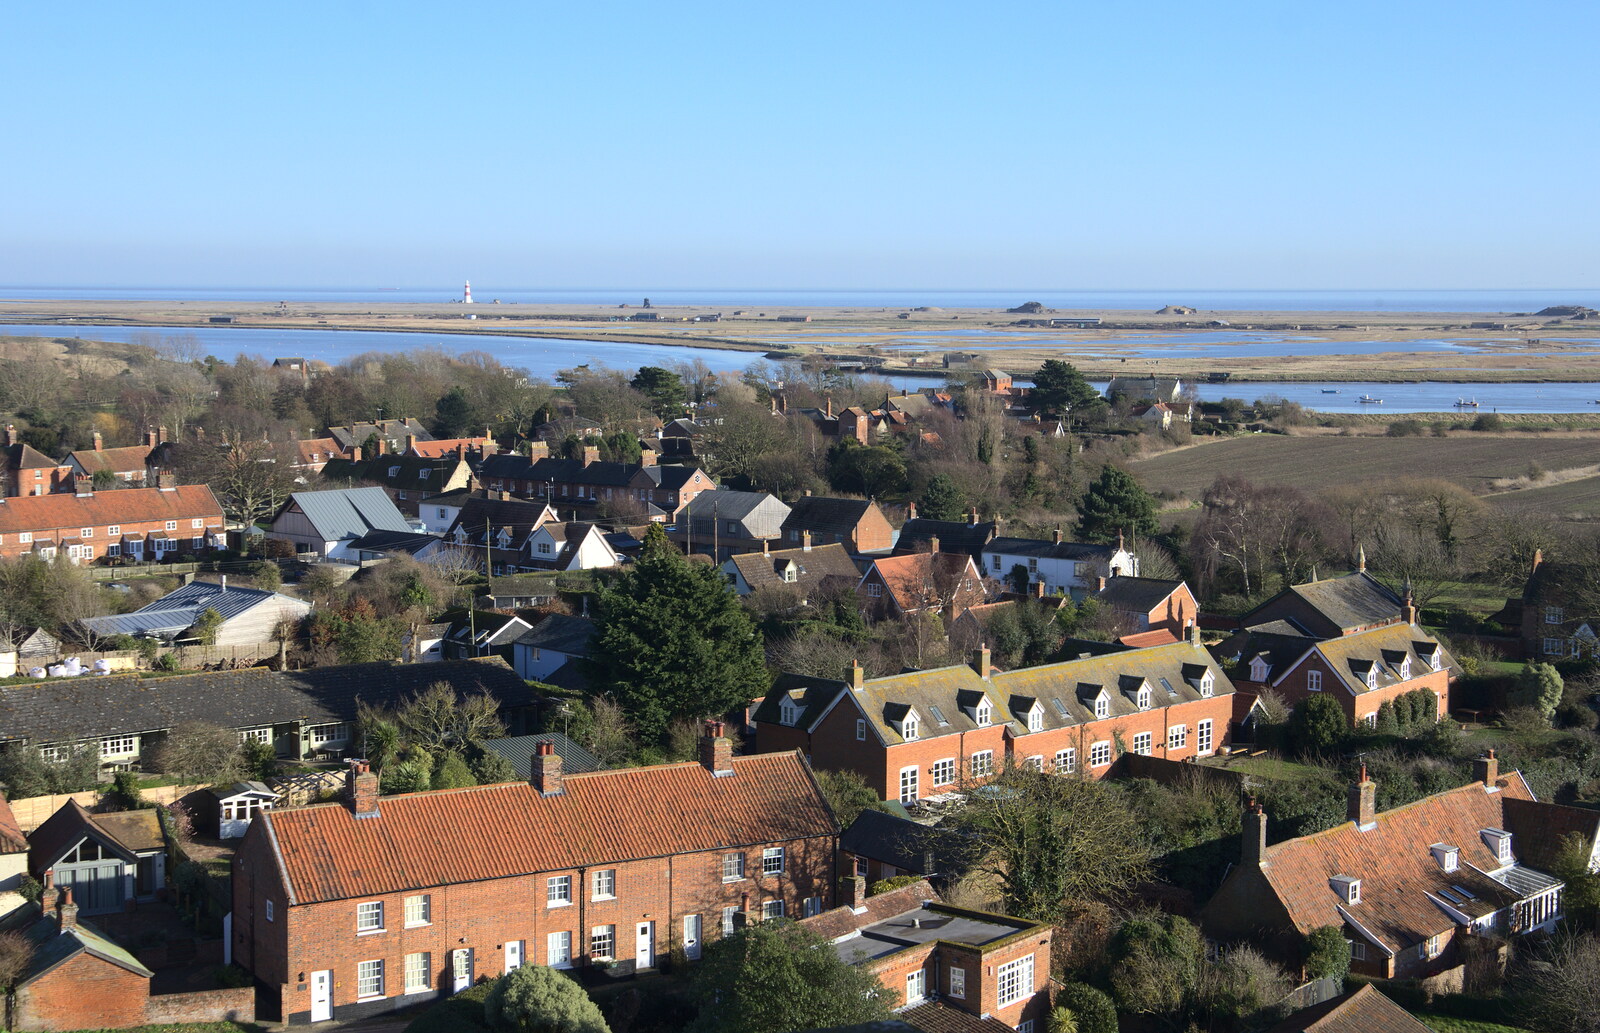 The town of Orford, with the Ness lighthouse in the background from An Orford Day Out, Orford, Suffolk - 17th February 2018